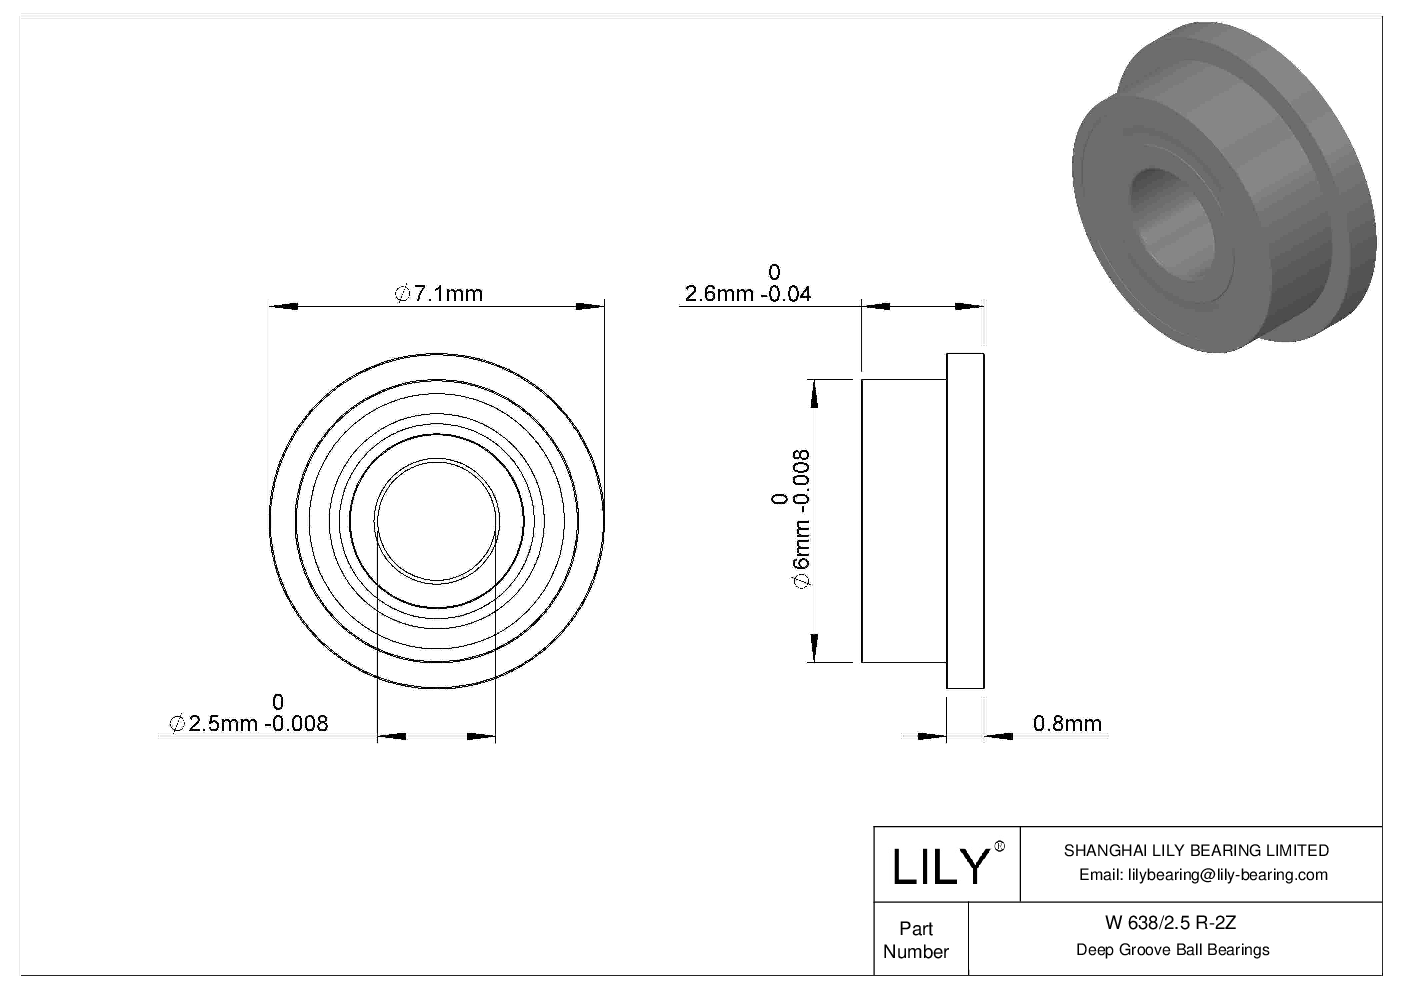 W 638/2.5 R-2Z Flanged Ball Bearings cad drawing